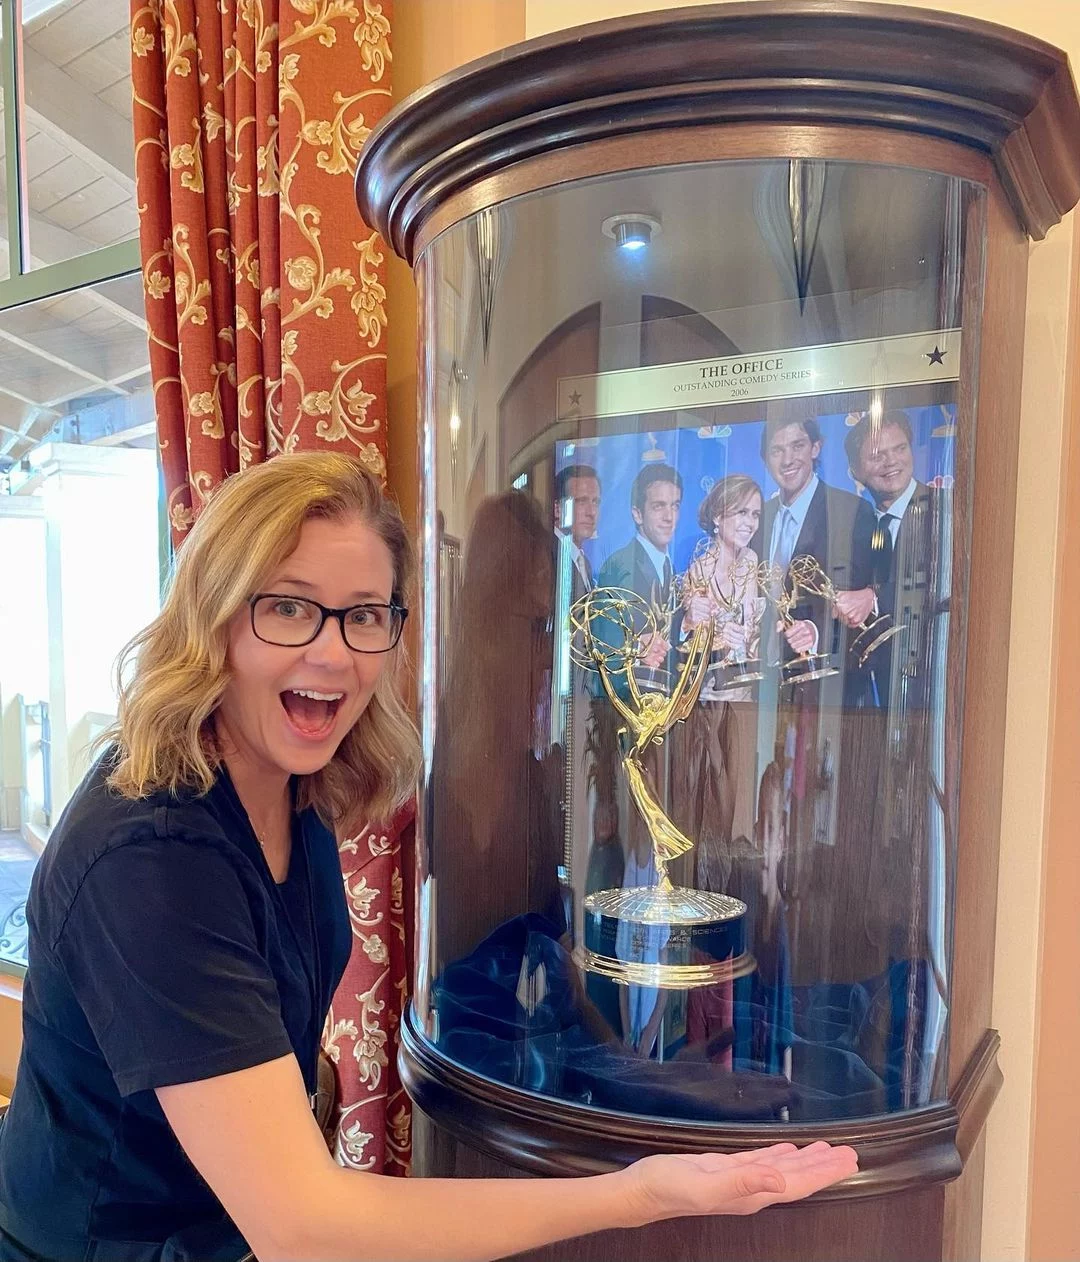 Jenna Fischer in Unistudios clicking picture with The Office Emmy